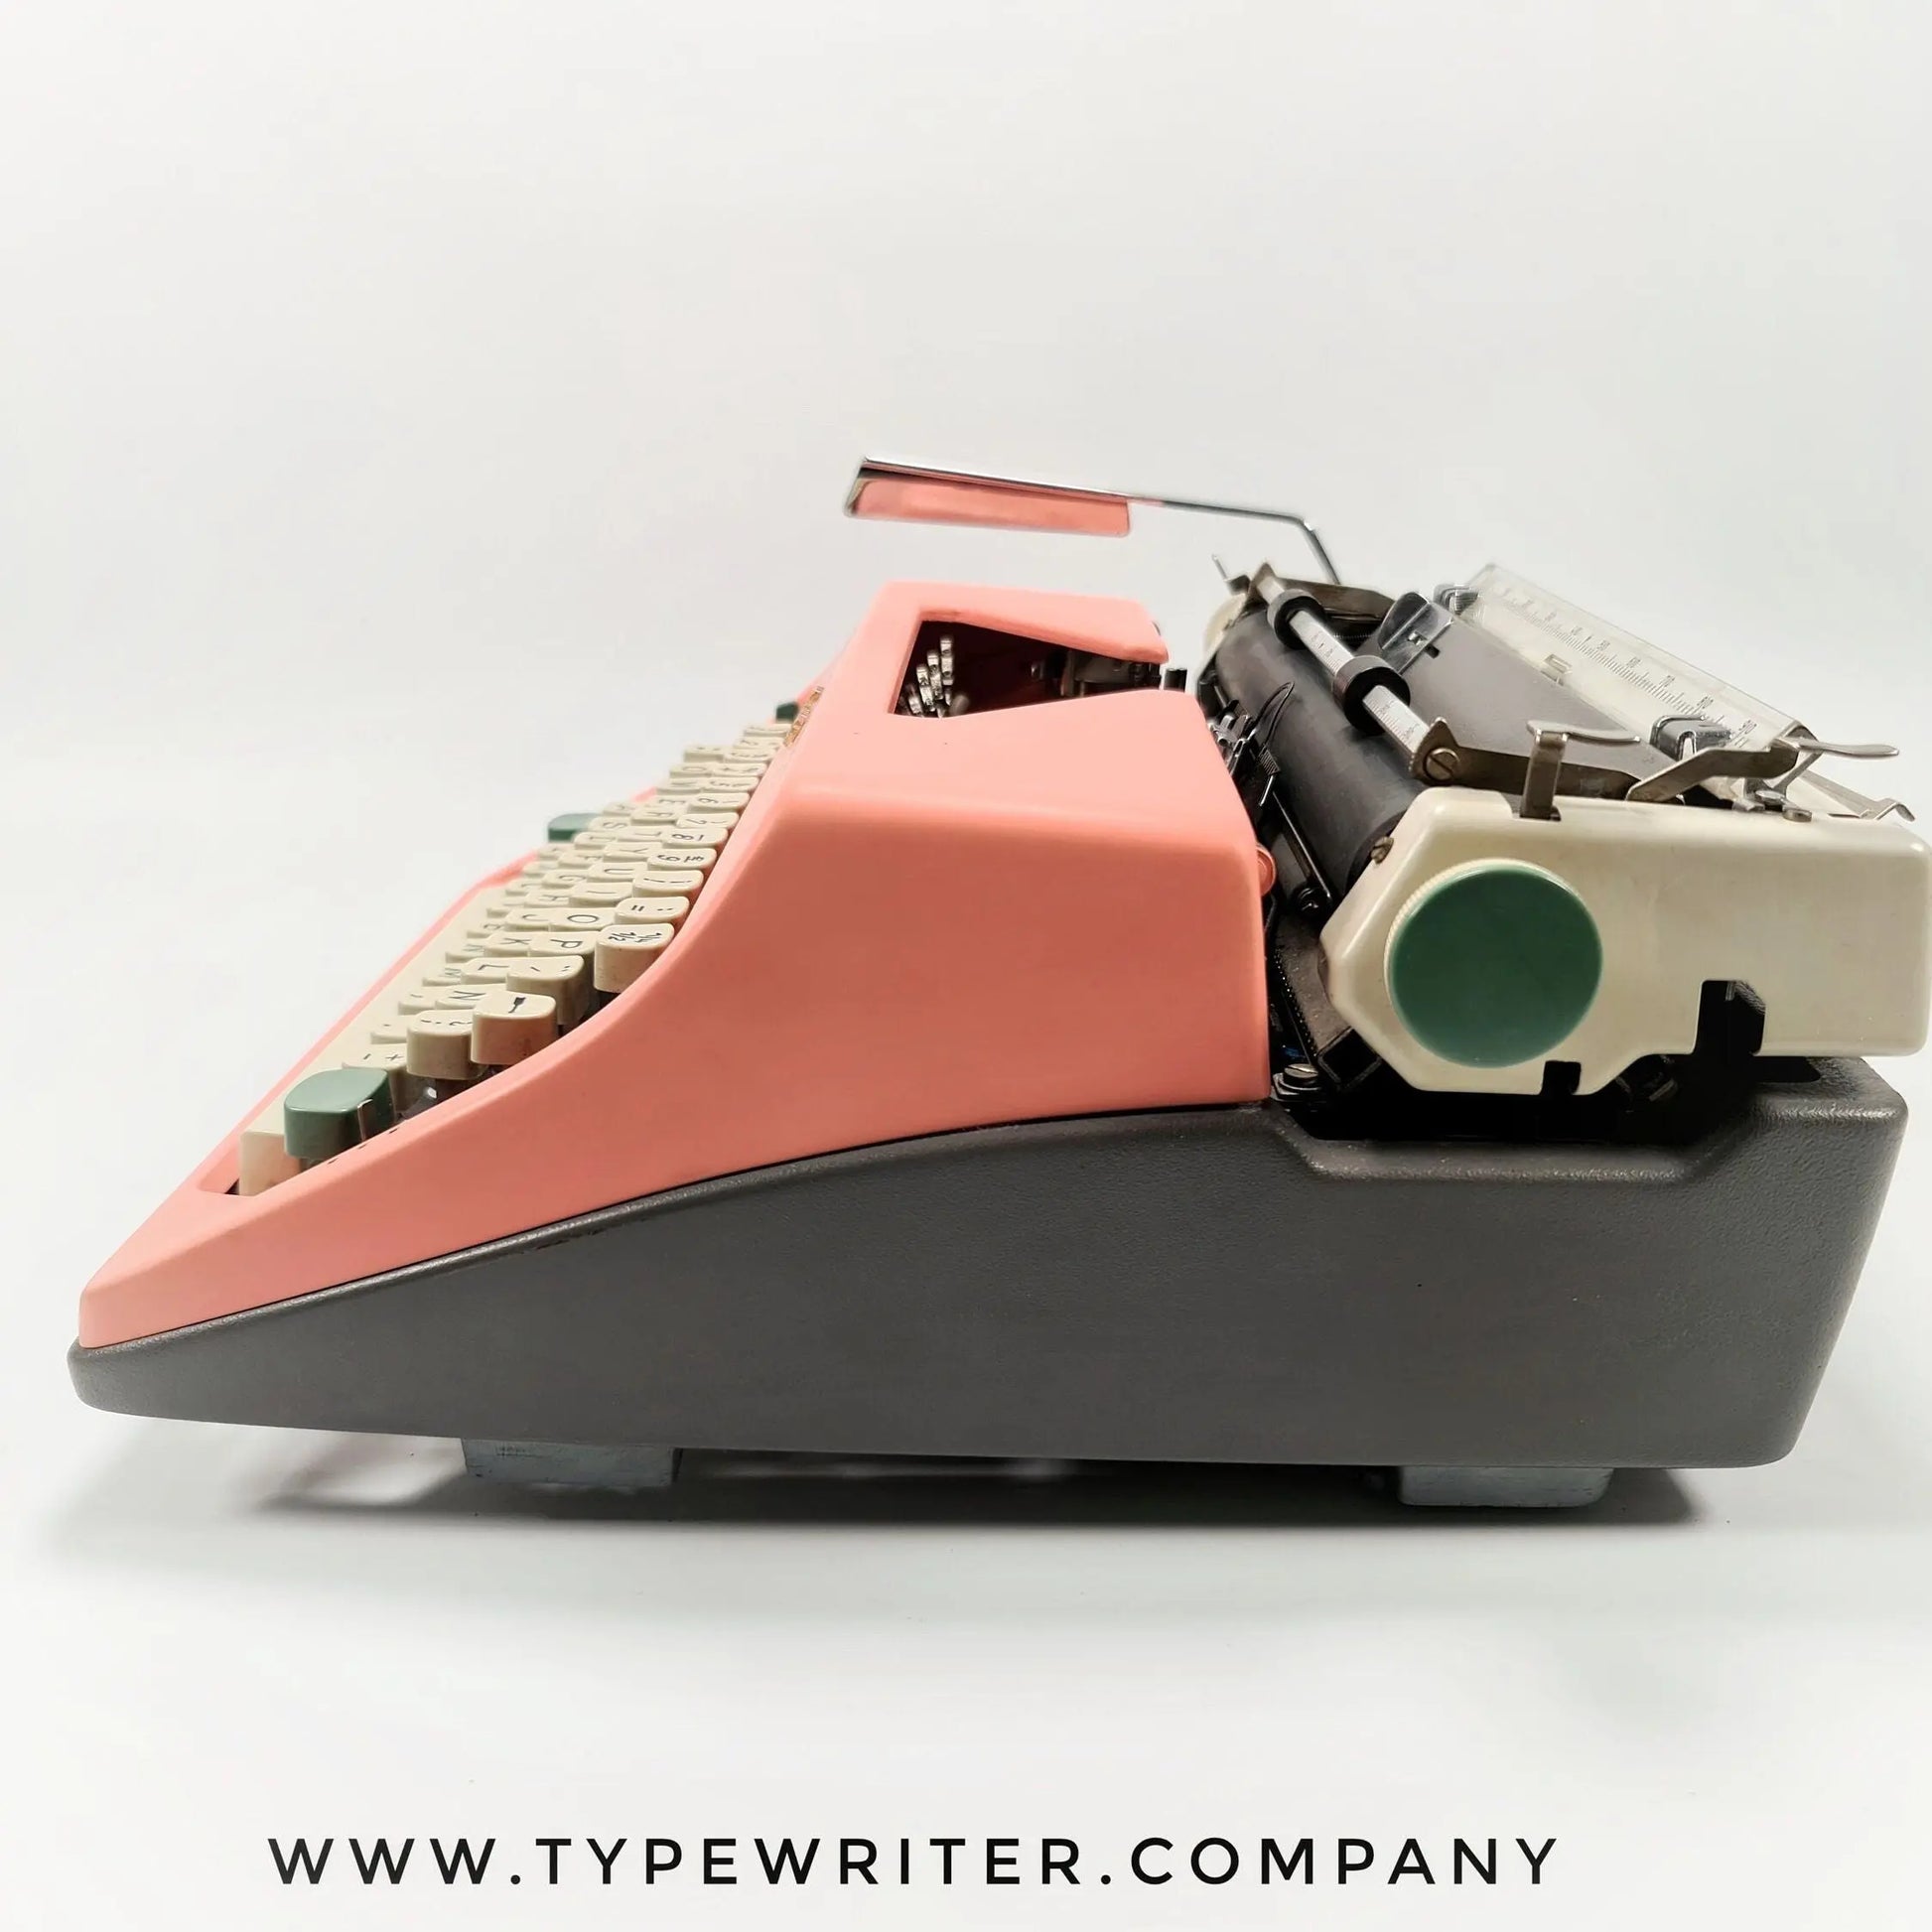 Olympia SM8/9 Pink Typewriter, Vintage, Mint Condition, Manual Portable, Professionally Serviced by Typewriter.Company - ElGranero Typewriter.Company